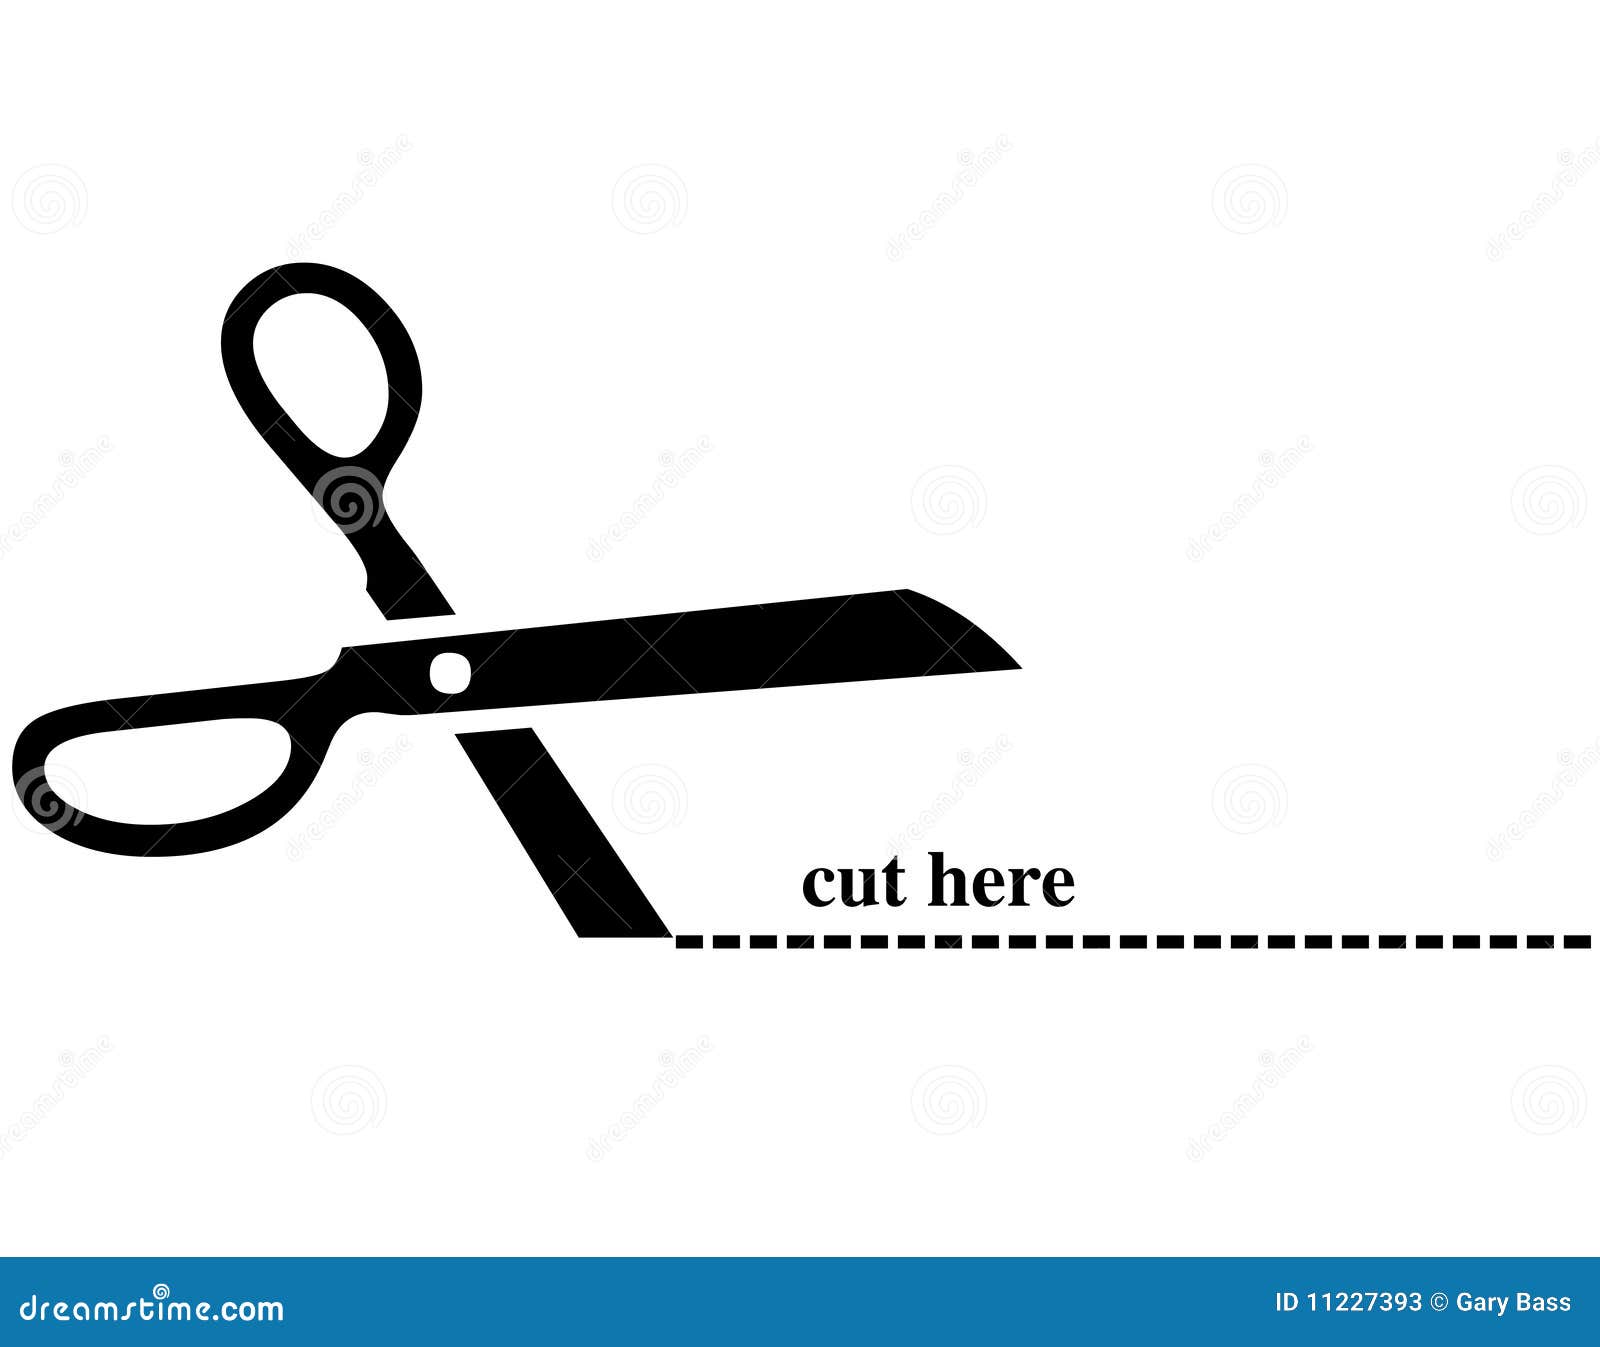 clipart perforated line with scissor - photo #21